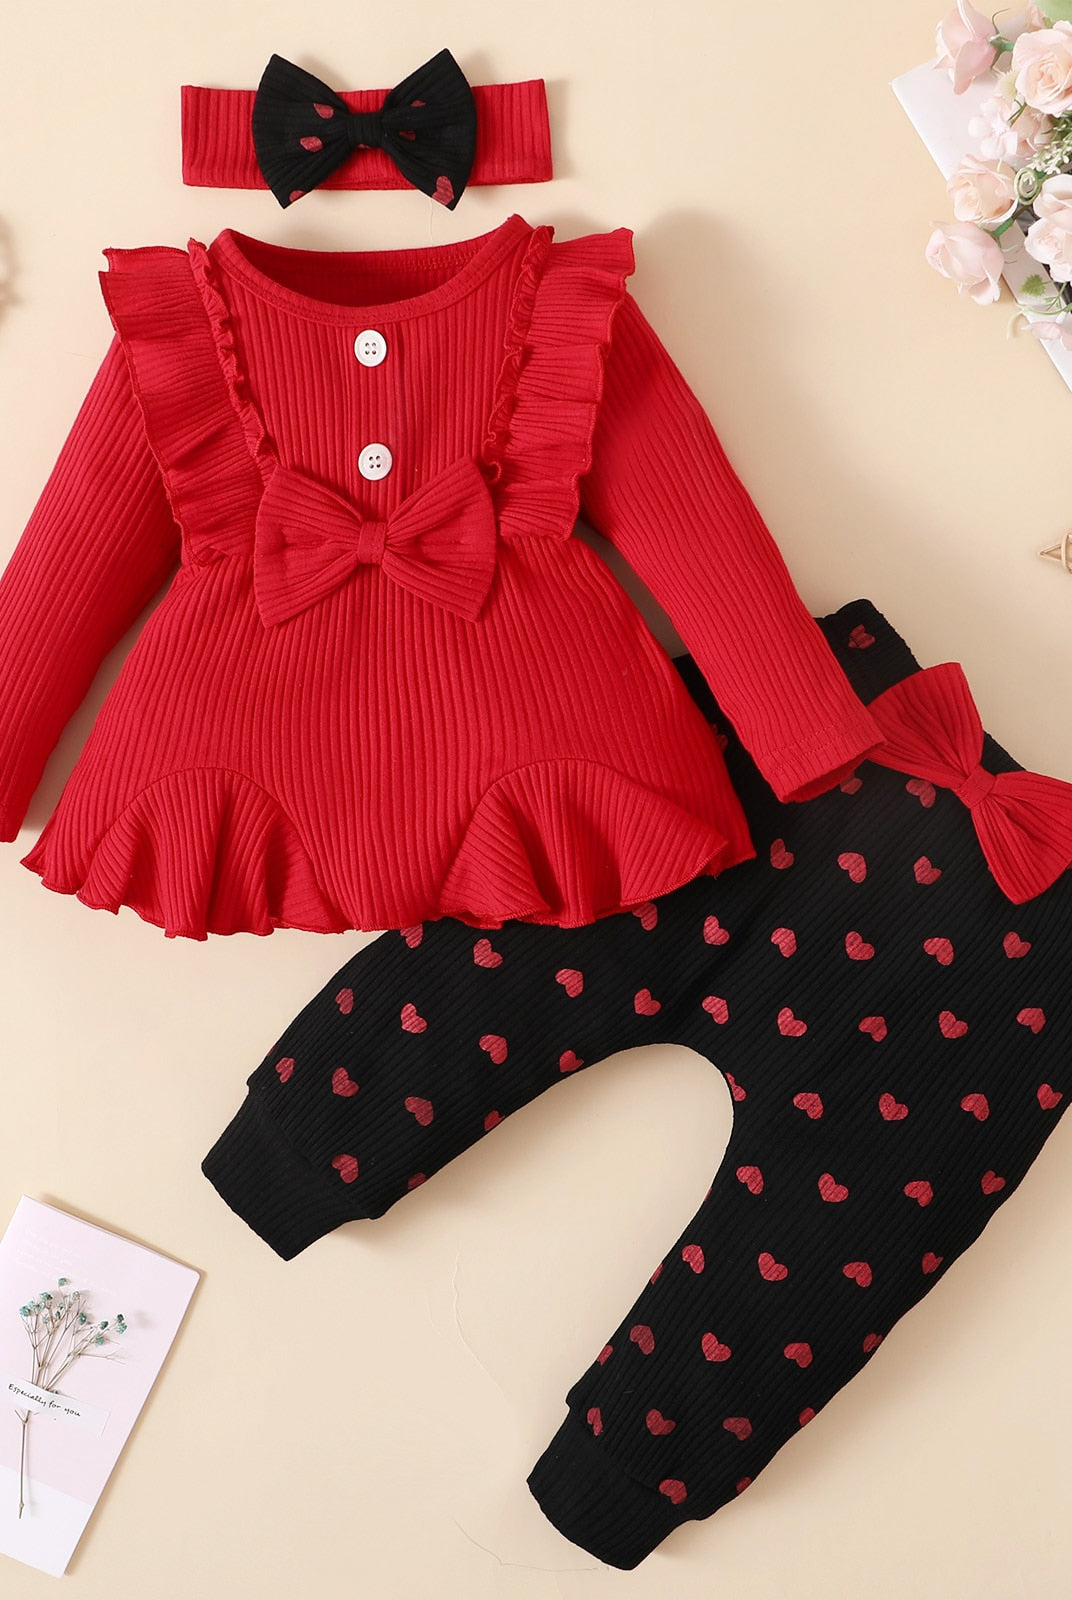 3-Piece Bowknot Girl Outfit in Red